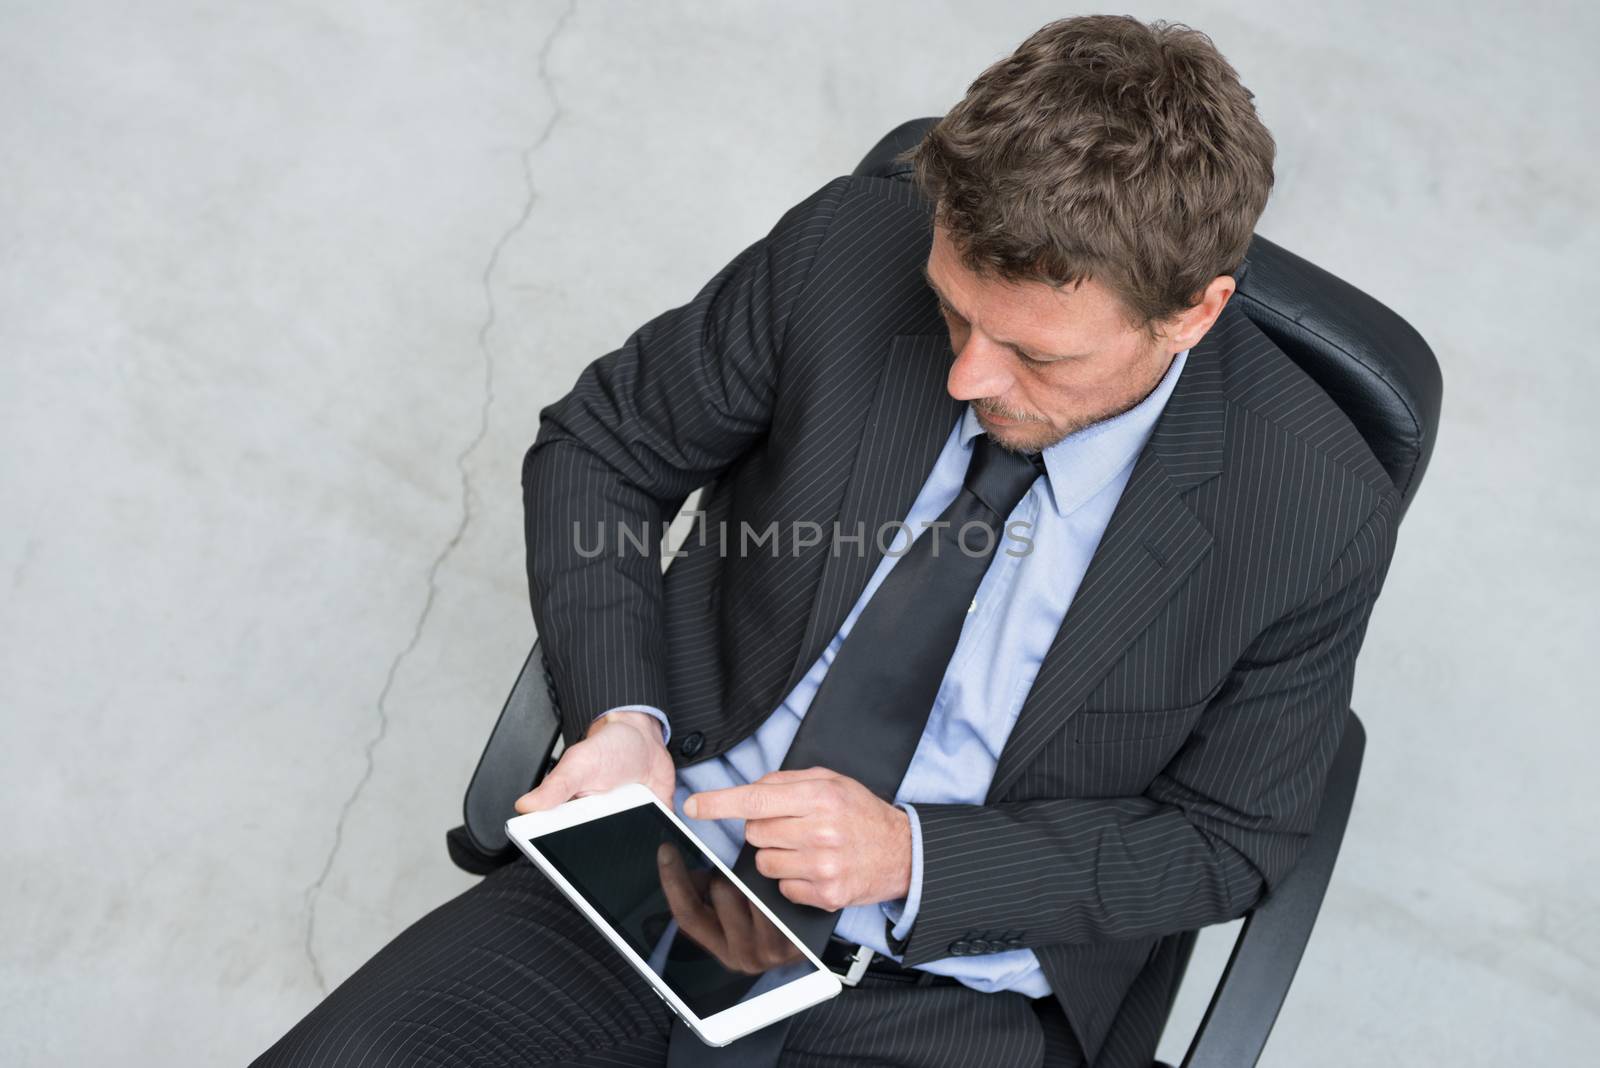 Businessman working with tablet on concrete floor background.